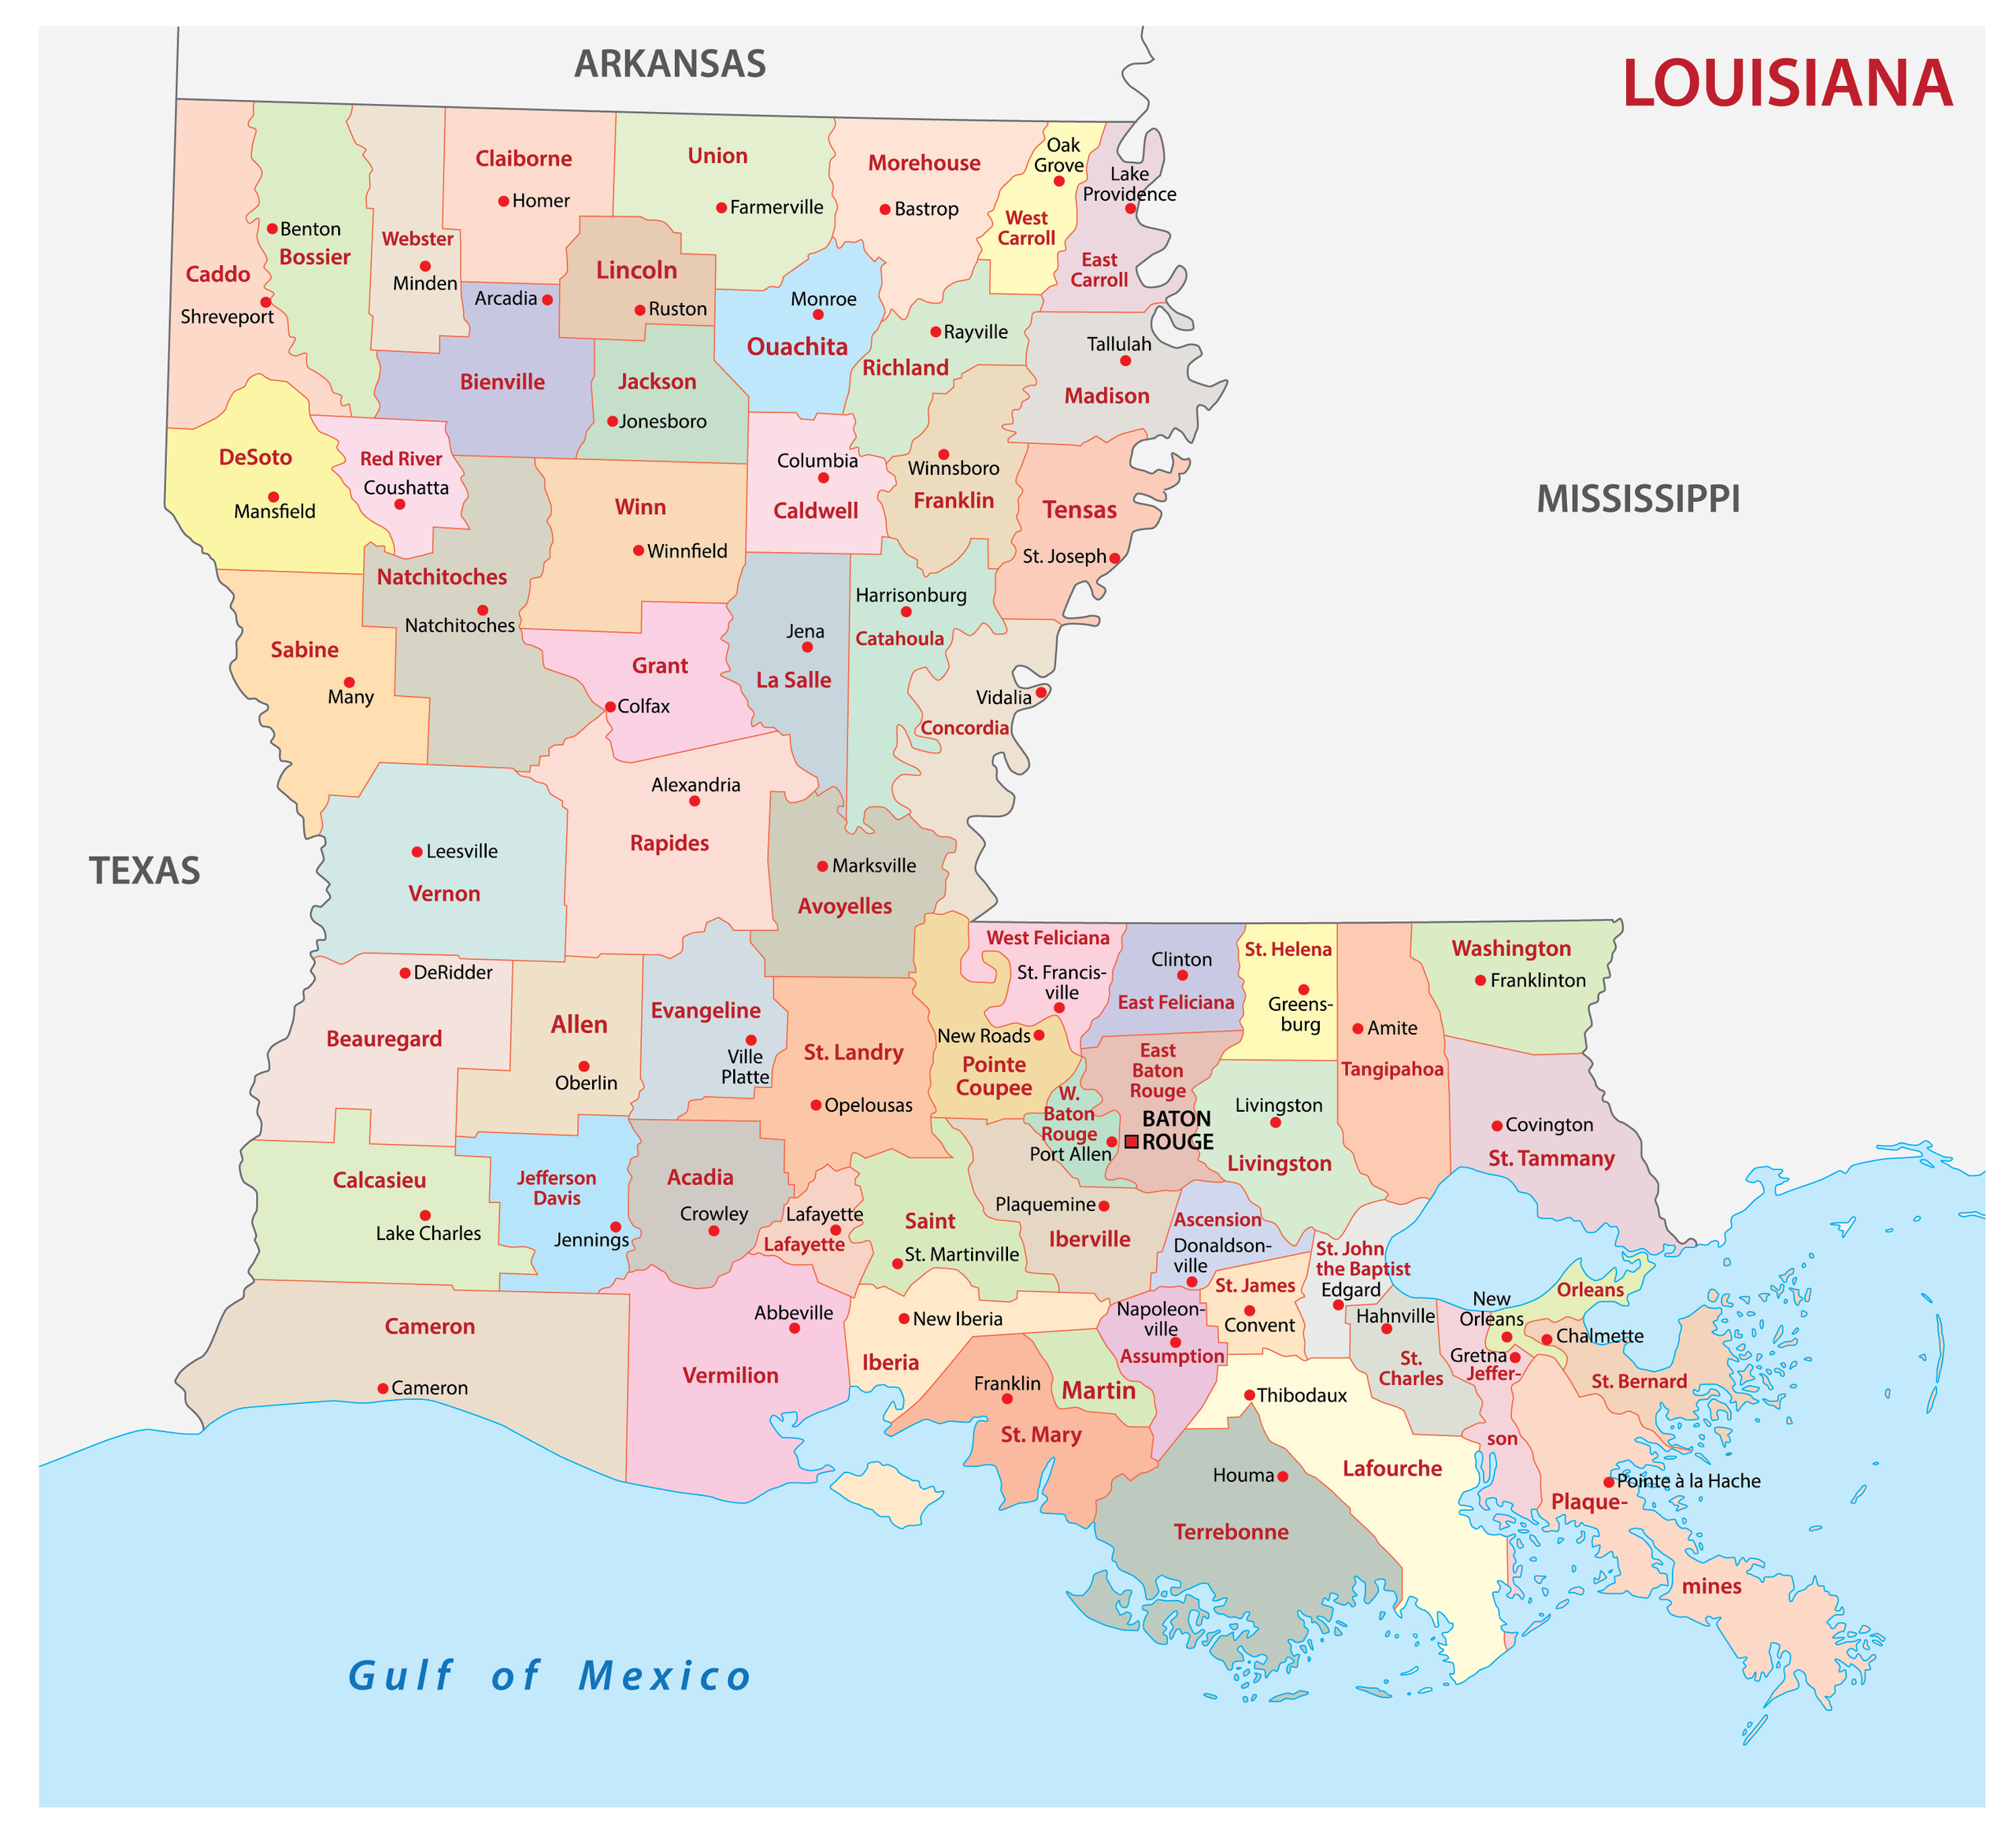 Louisiana Pictures and Facts